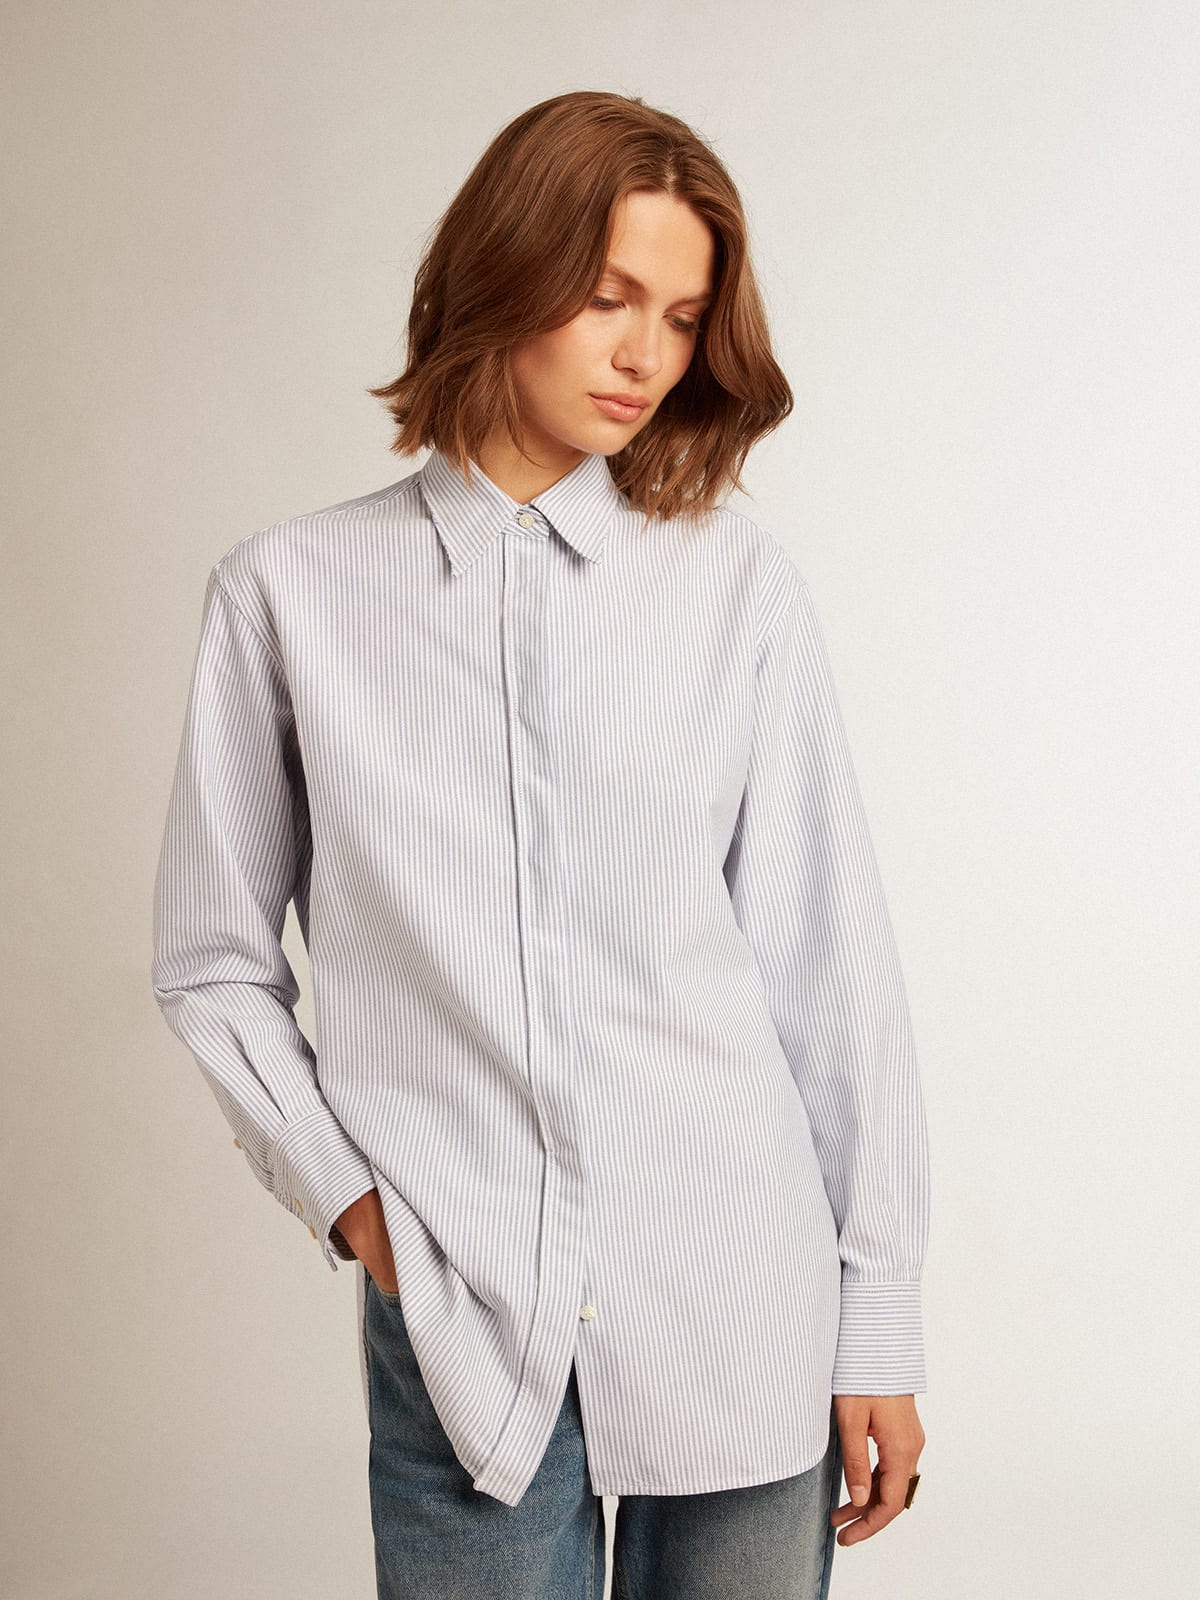 Golden Goose - Women’s shirt with light blue candy stripes in 